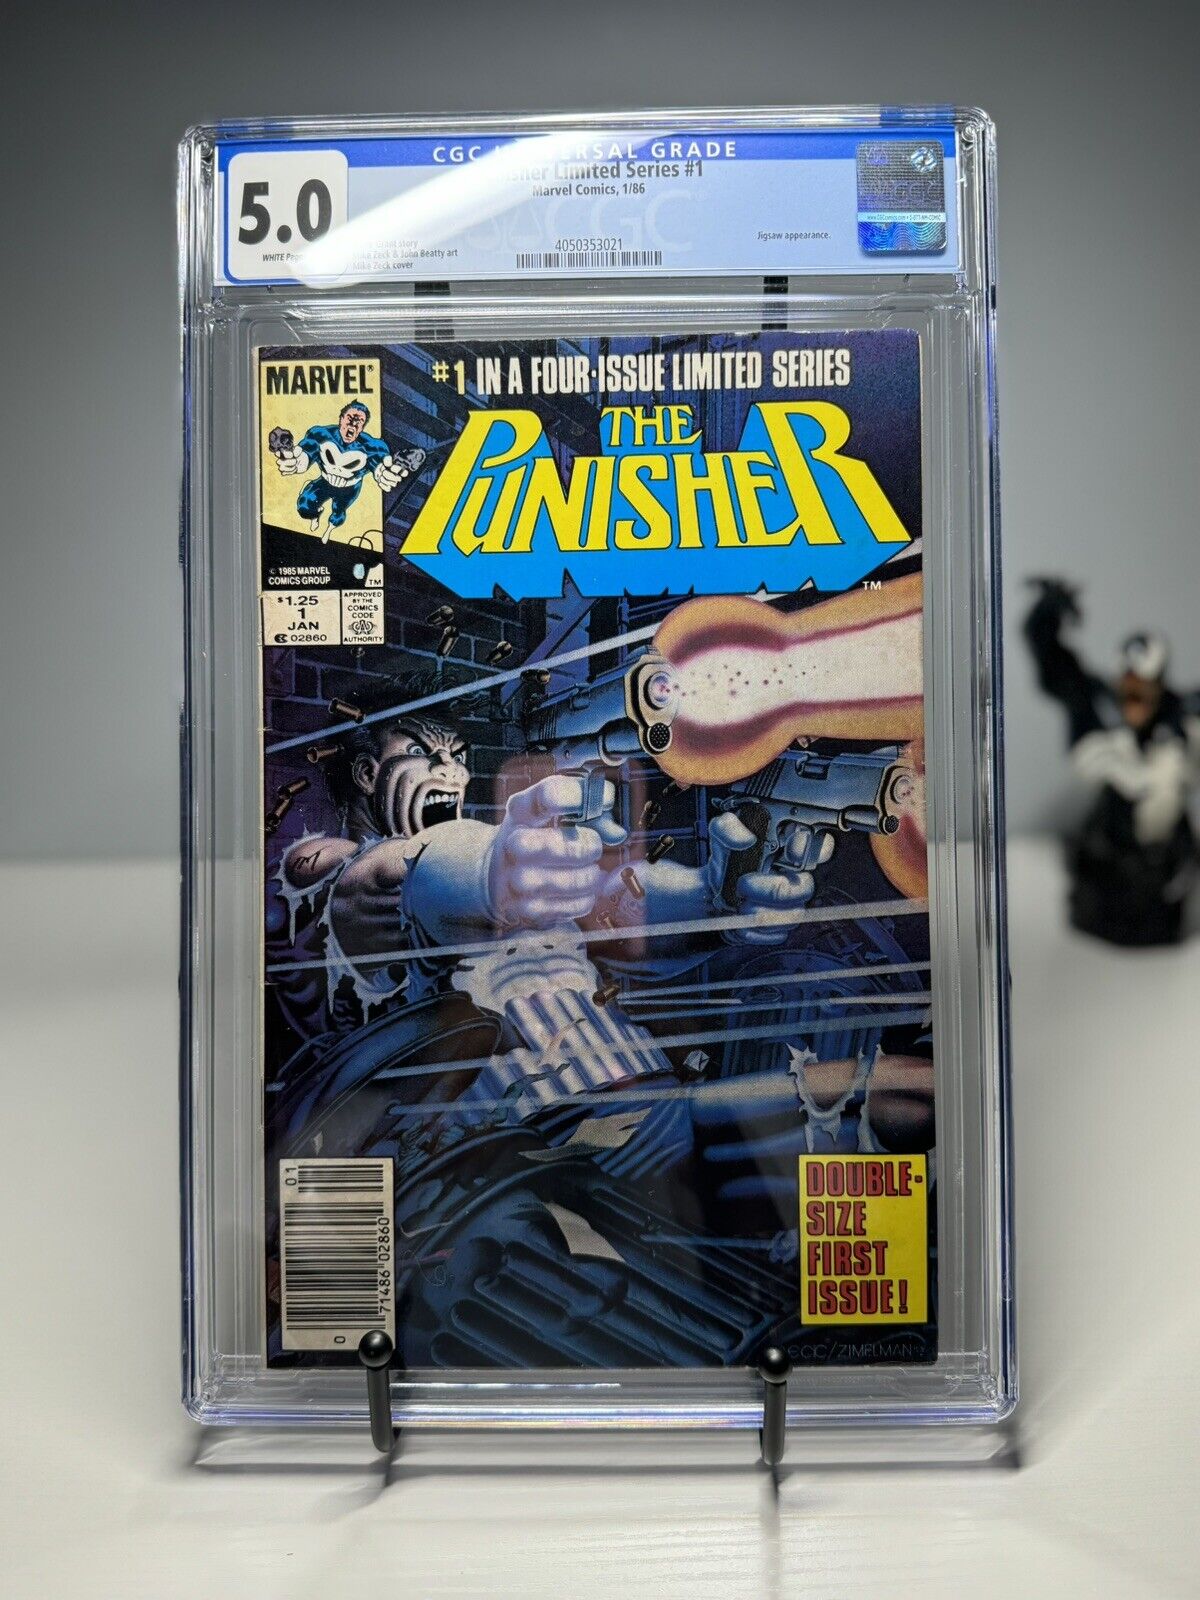 THE PUNISHER LIMITED SERIES #1,2,3,4 & 5 | CGC